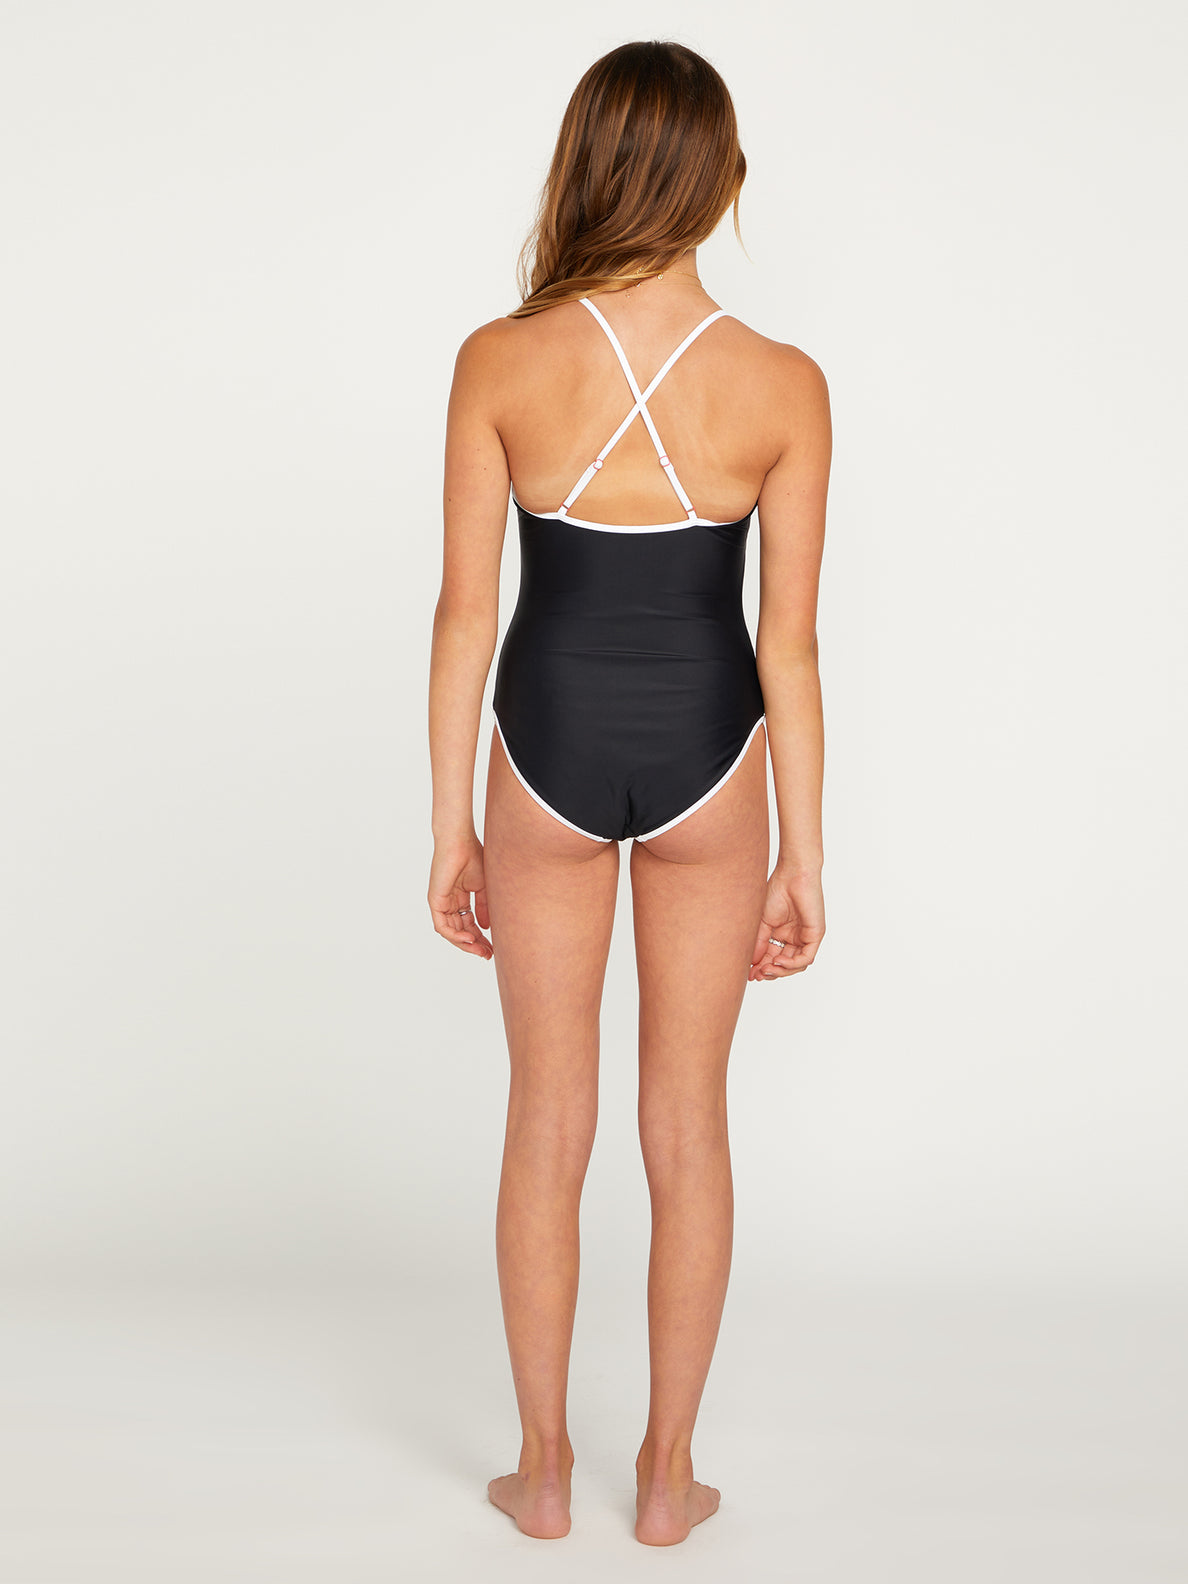 Girls Coco One-Piece Swimsuit - Candy Apple